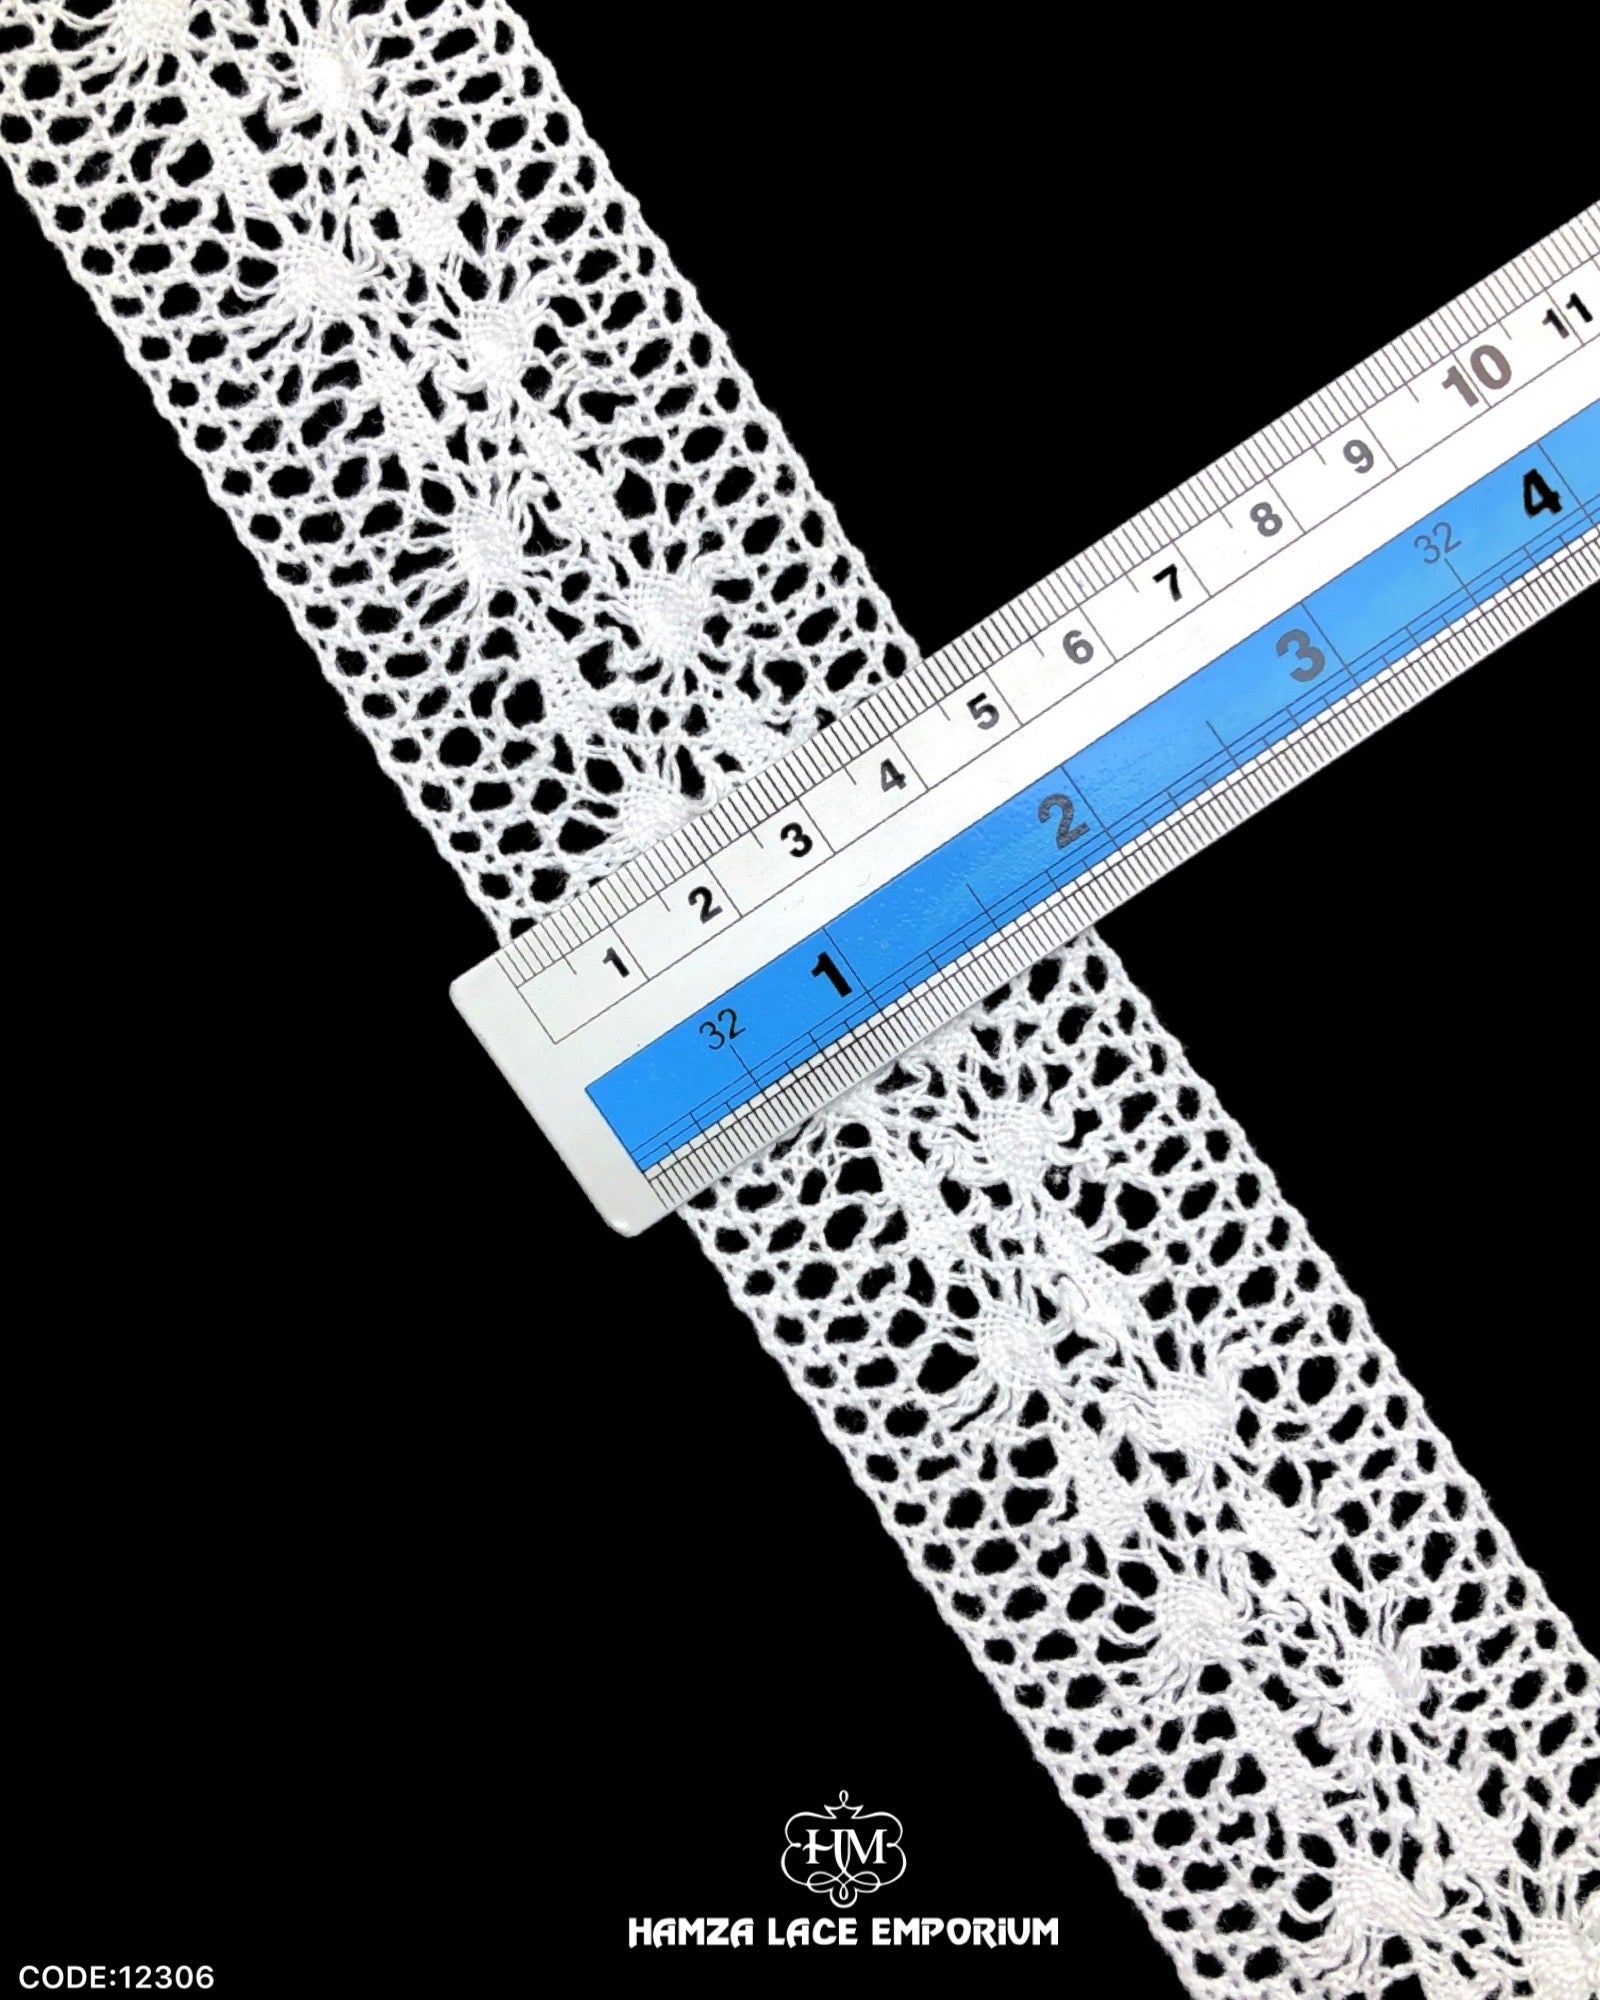 Size of the 'Center Filling Crochet Lace 12306' is shown with the help of a ruler as '1.5' inches